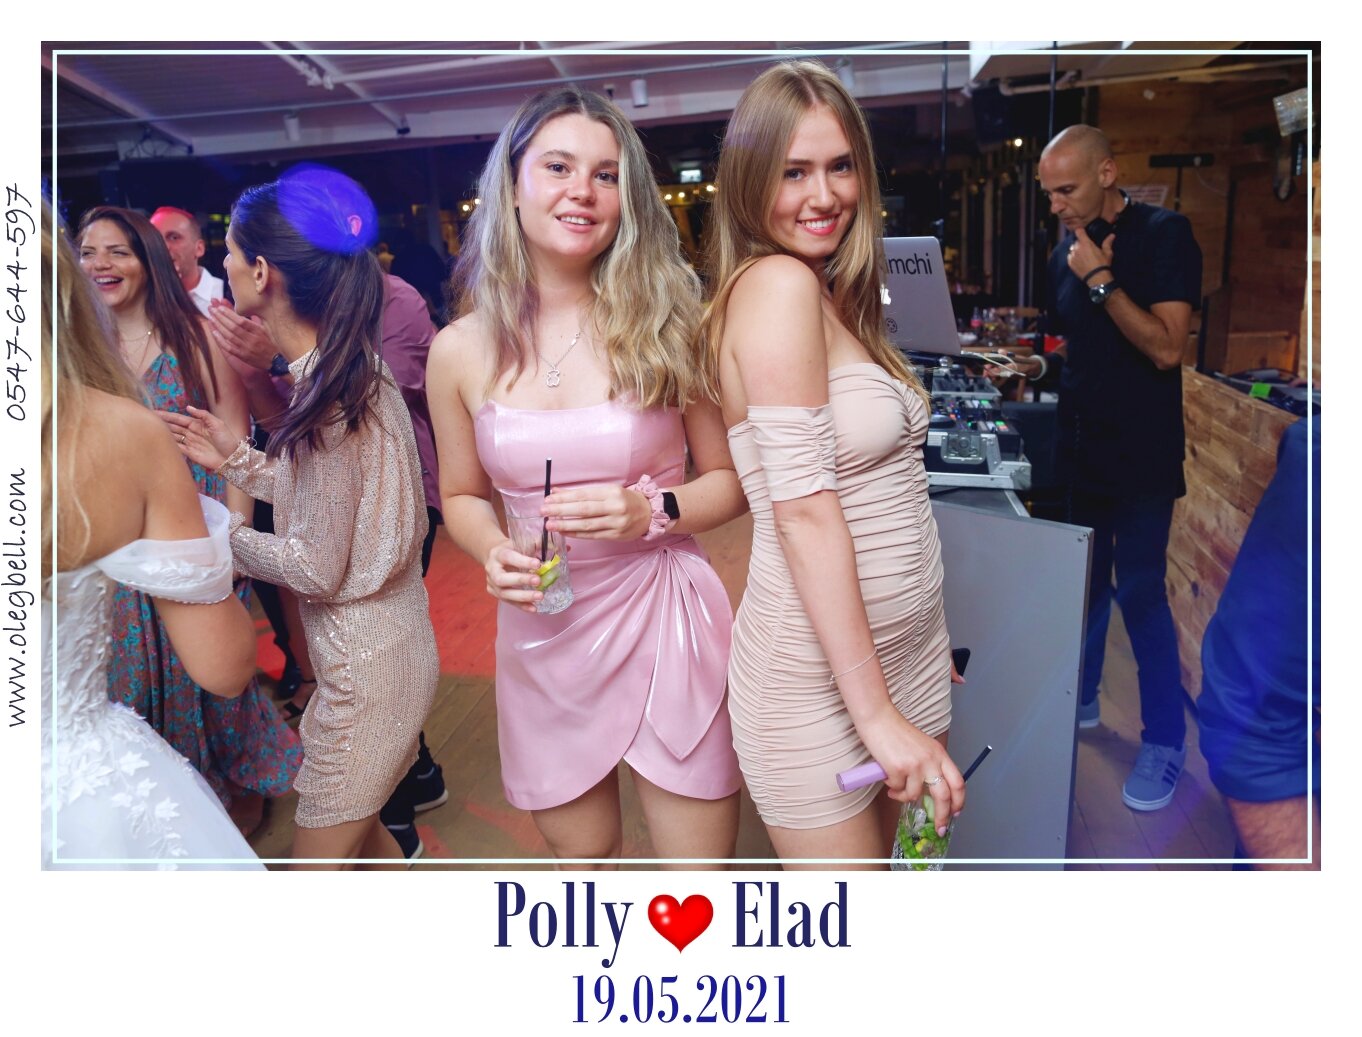 POLLY_AND_ELAD_WD_MG_SITE_028.JPG